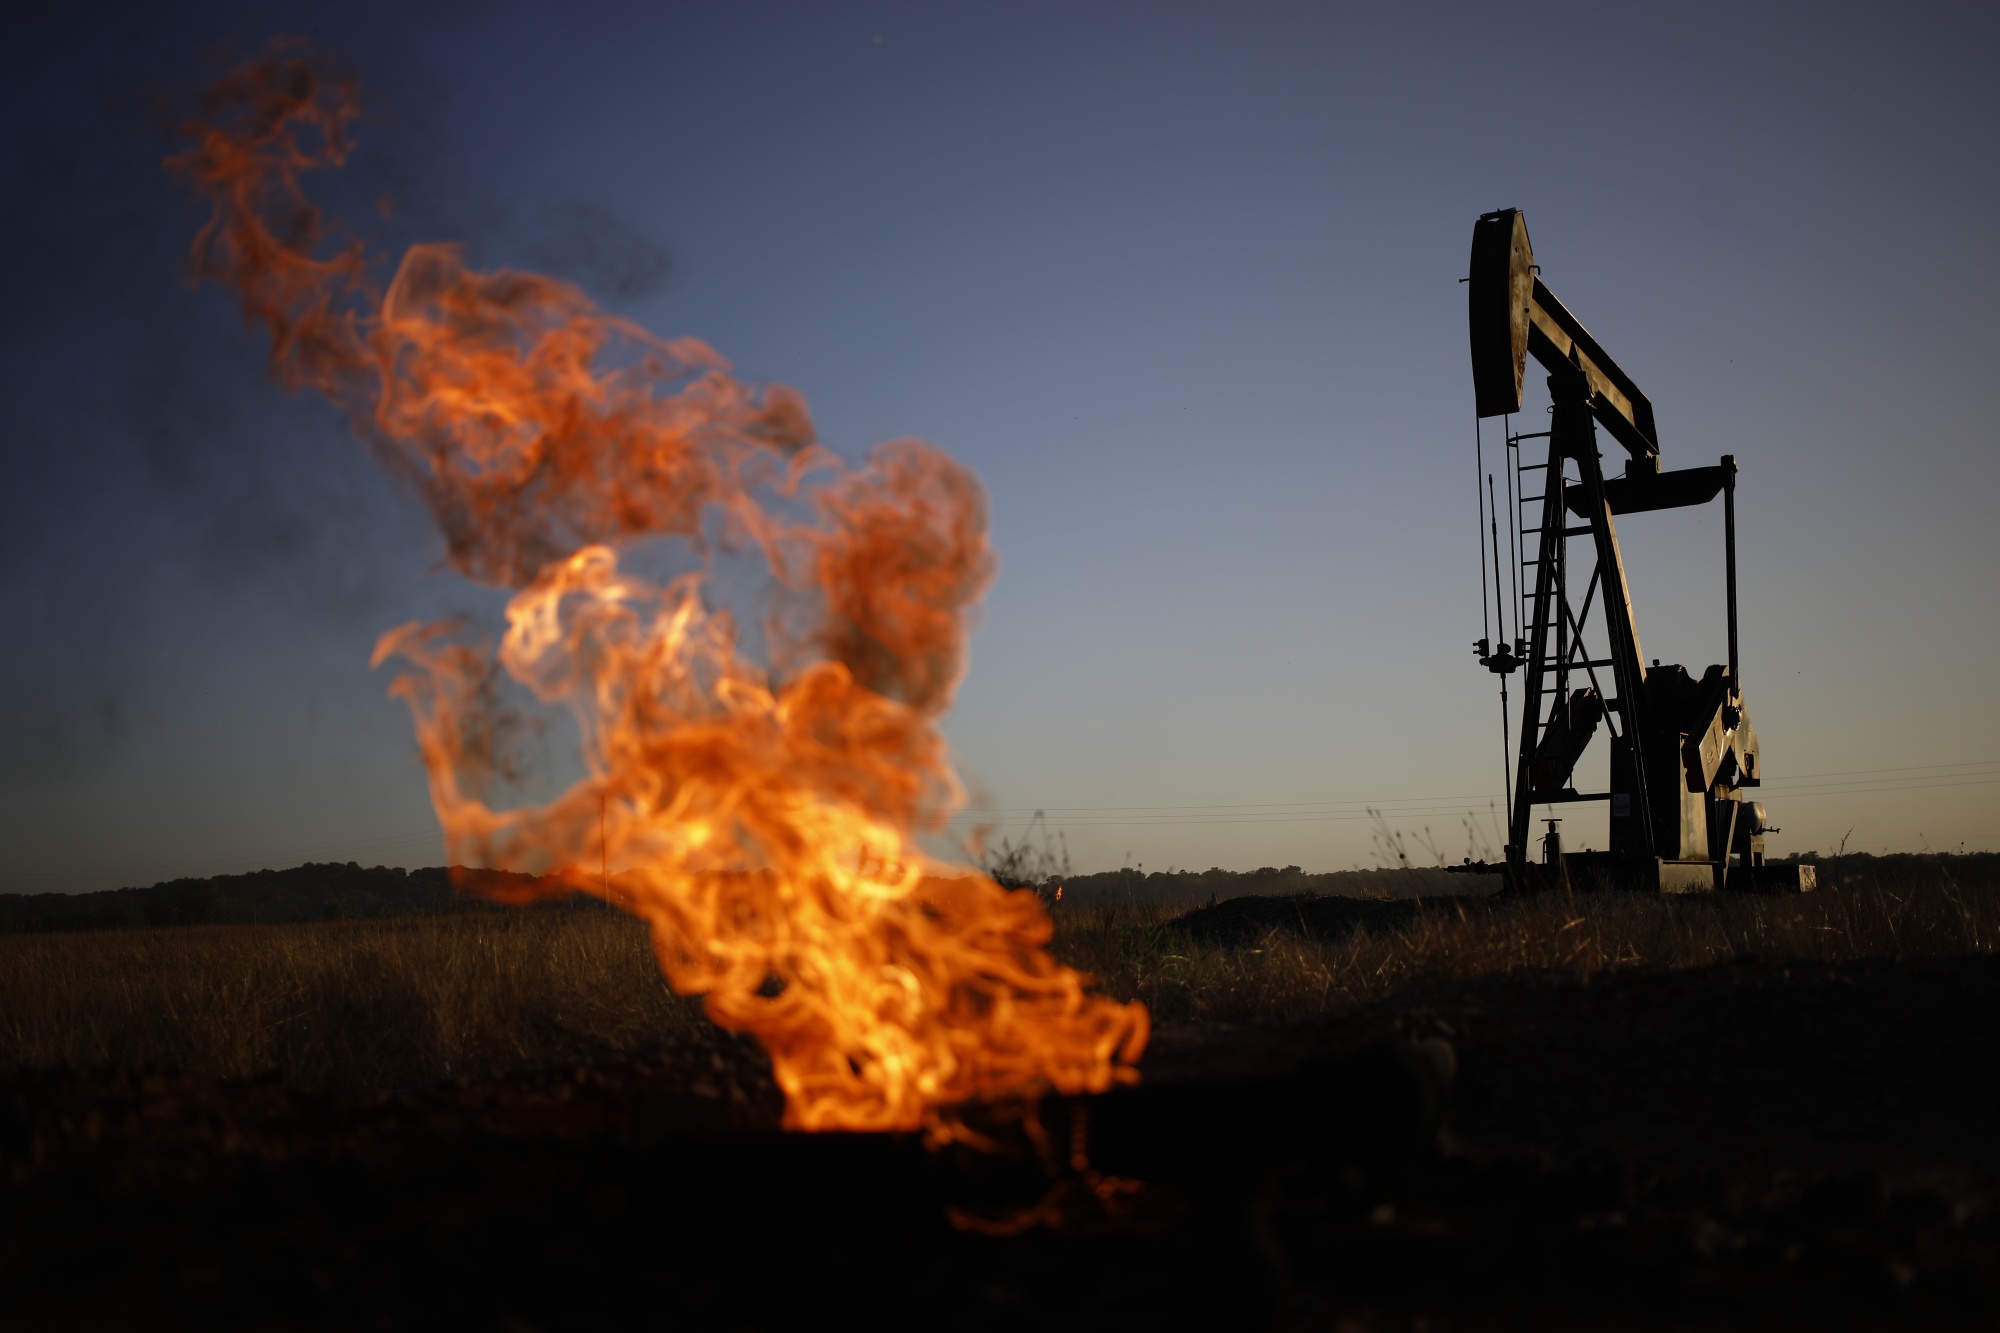 A natural gas flare burns near an oil pump jack. Subsidies for fossil fuels have risen over the past two years despite nations’ commitments to phasing them out and reducing emissions.